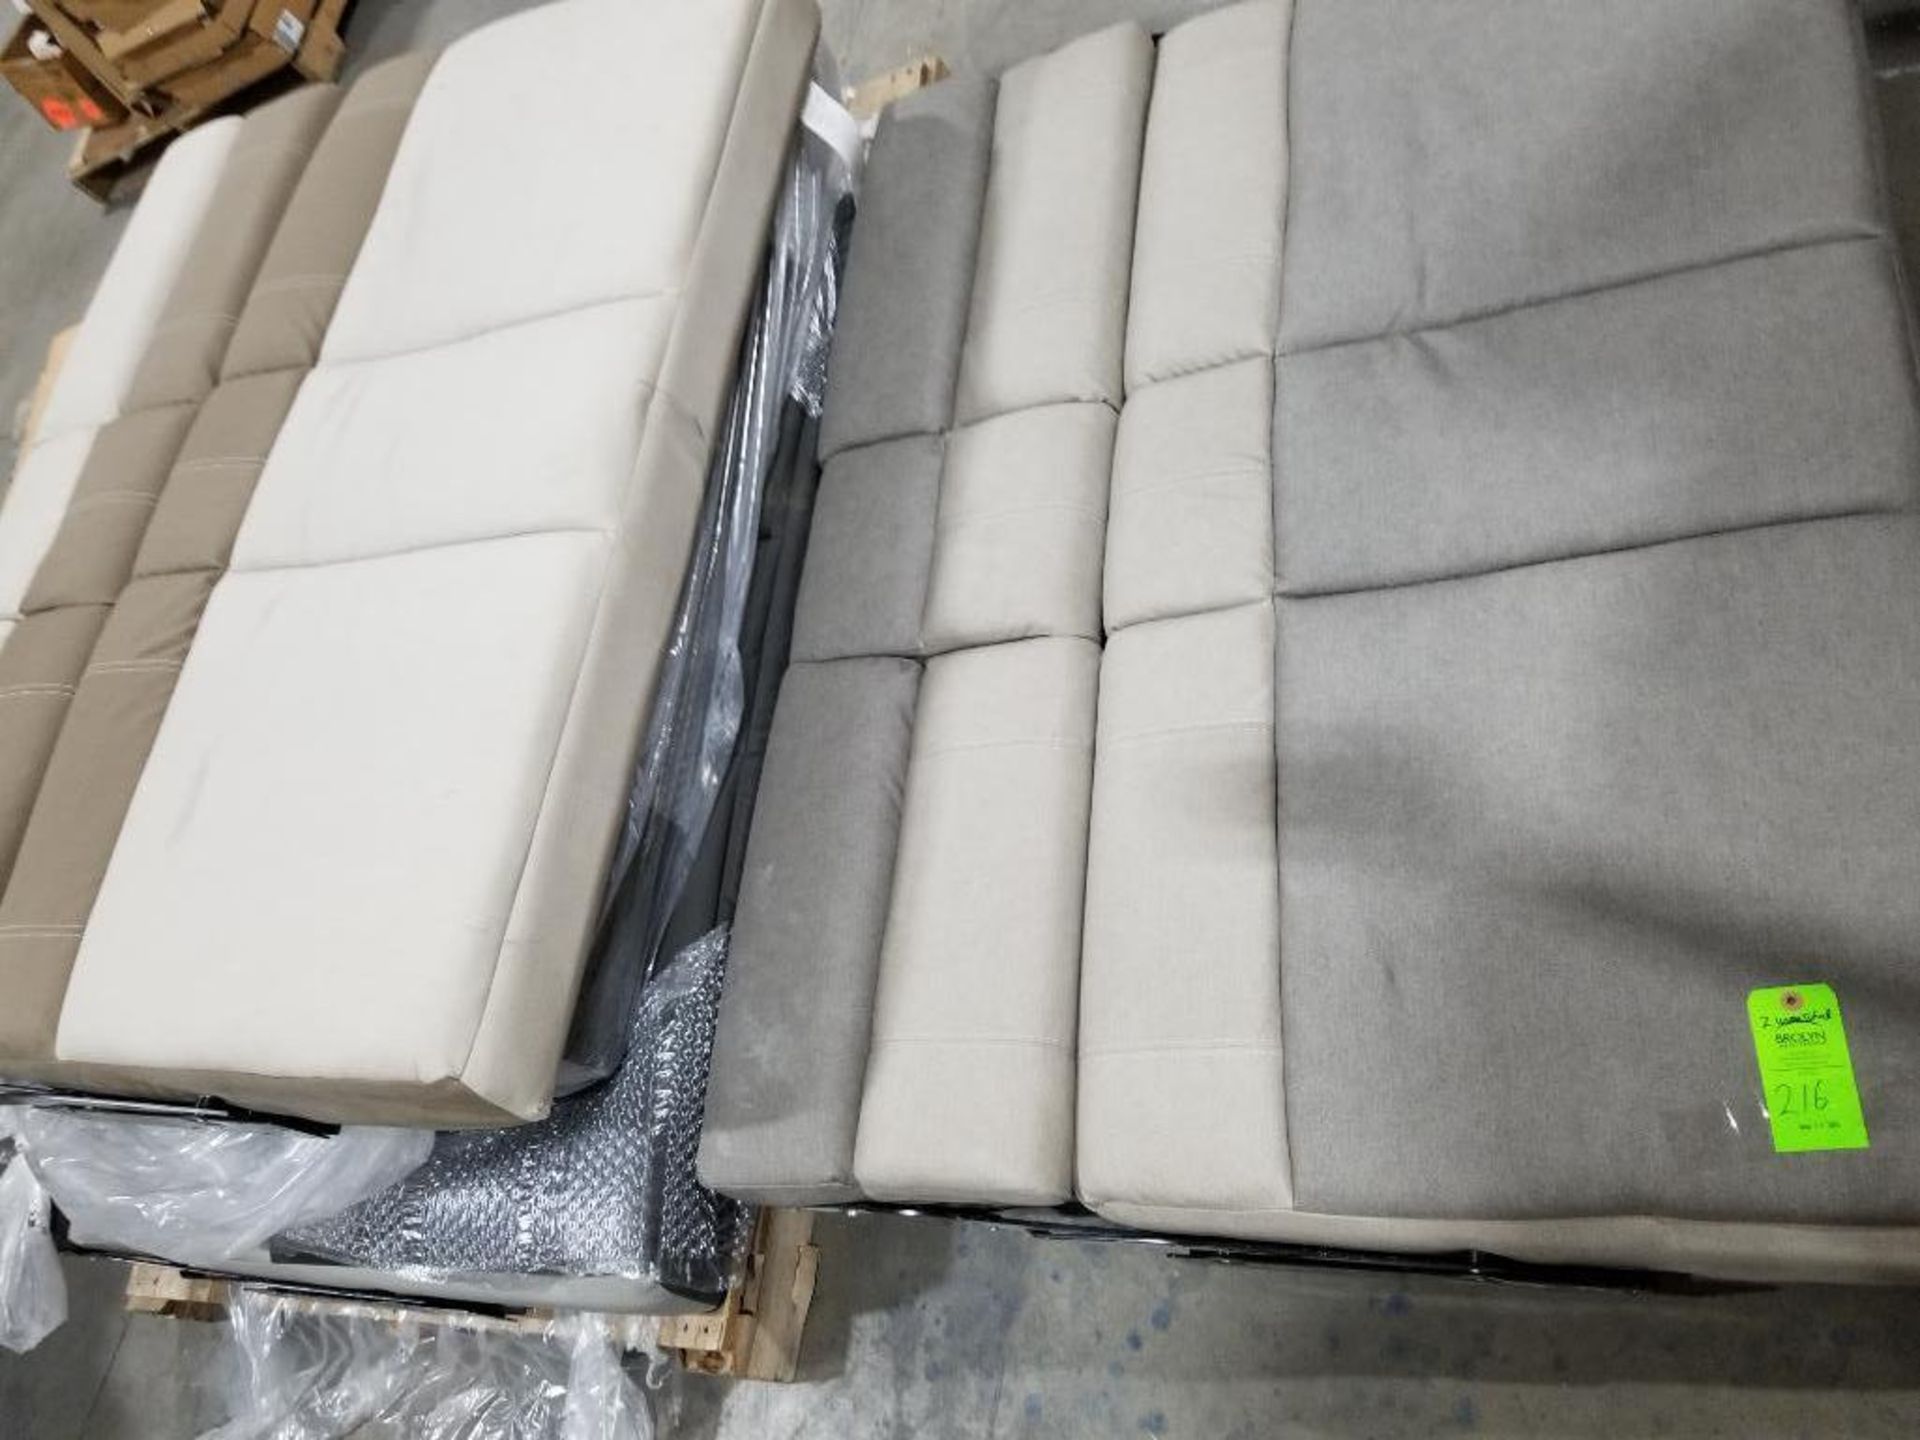 Qty 2 - 60in Happijac 60in fold up bench seating. (one has spots that will require cleaning)